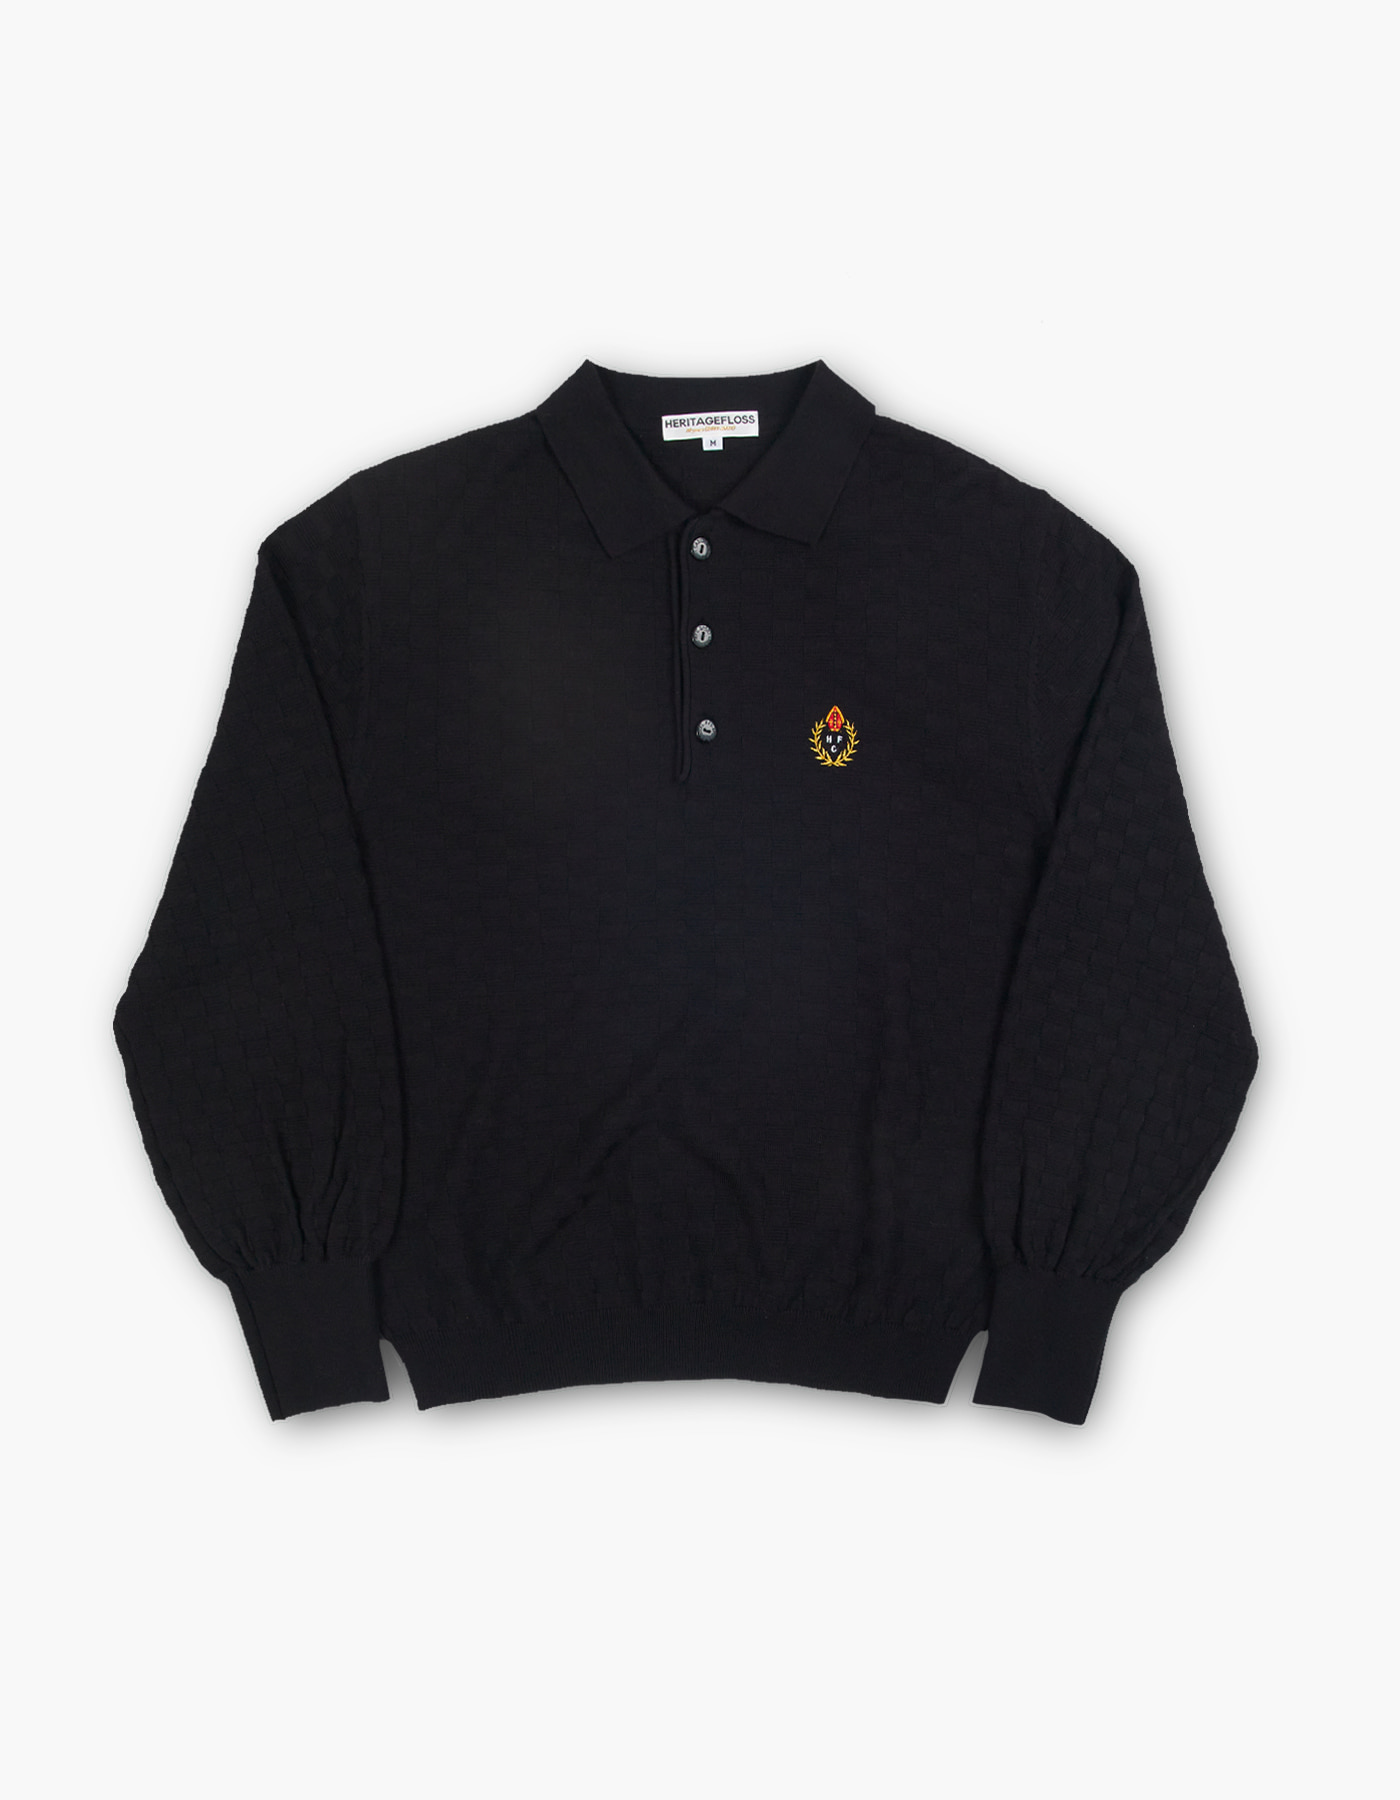 HFC CREST CHECKED POLO / BLACK